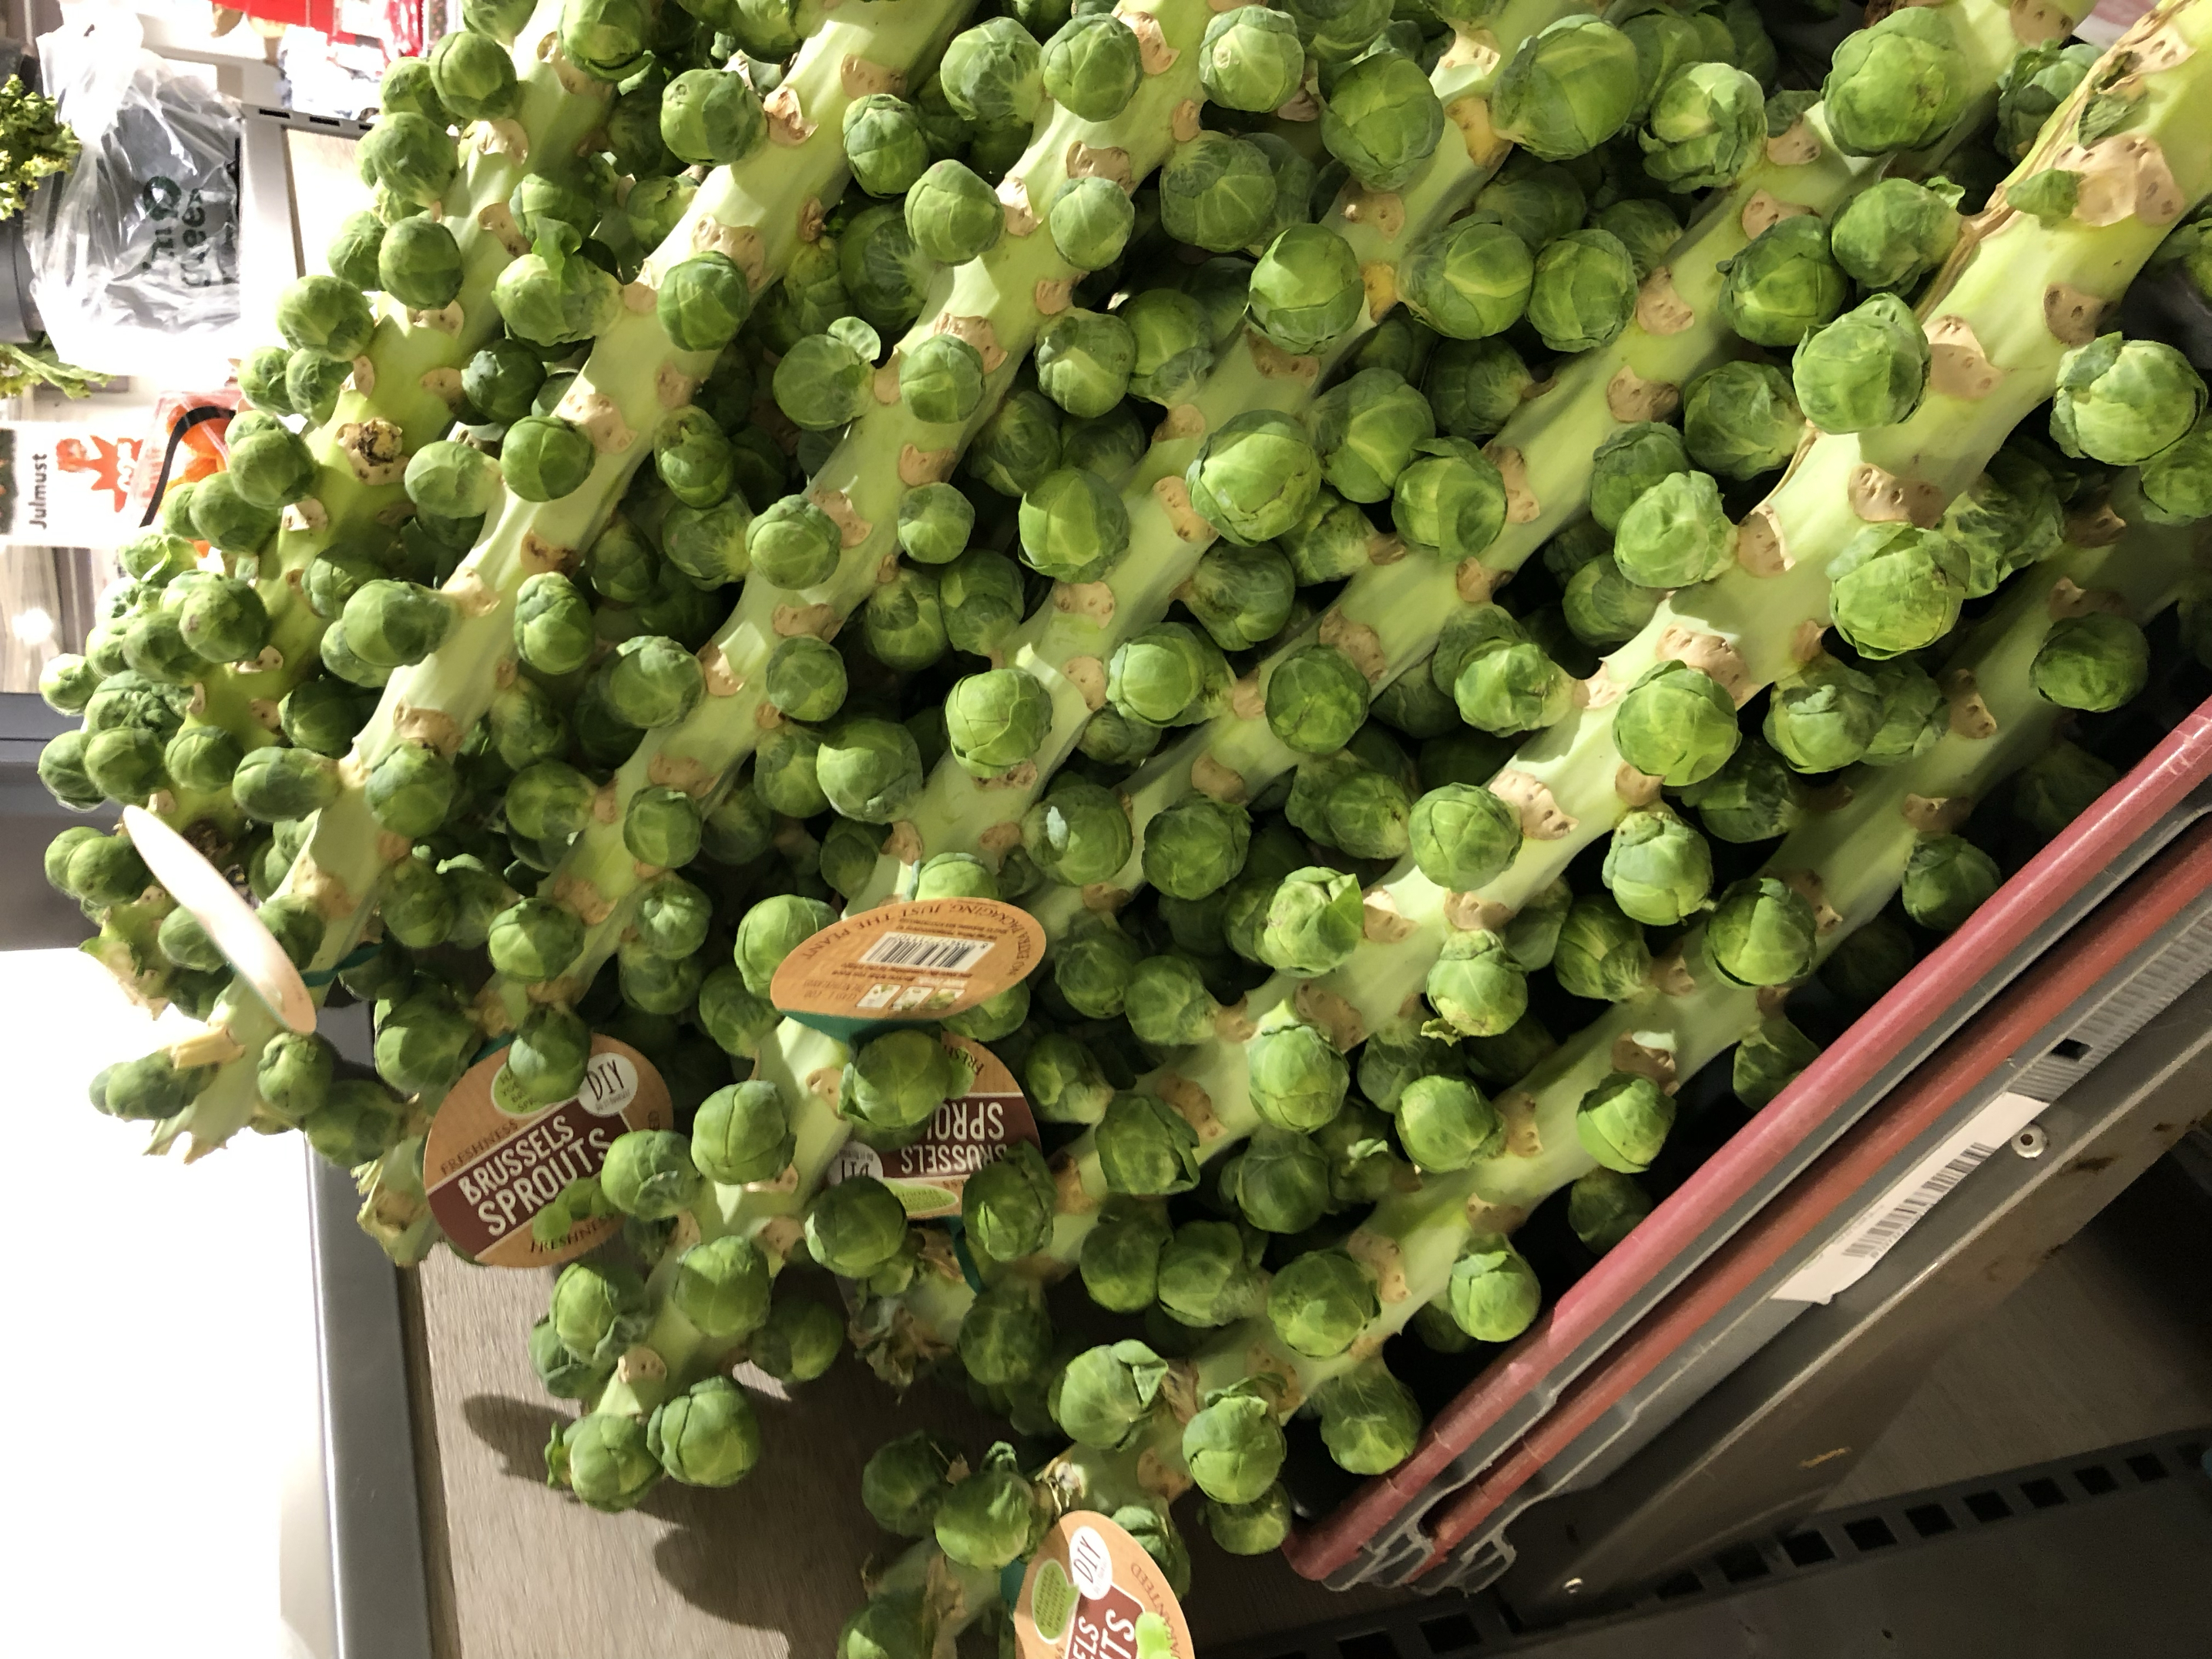 Brussels sprouts growing along long plant stalks